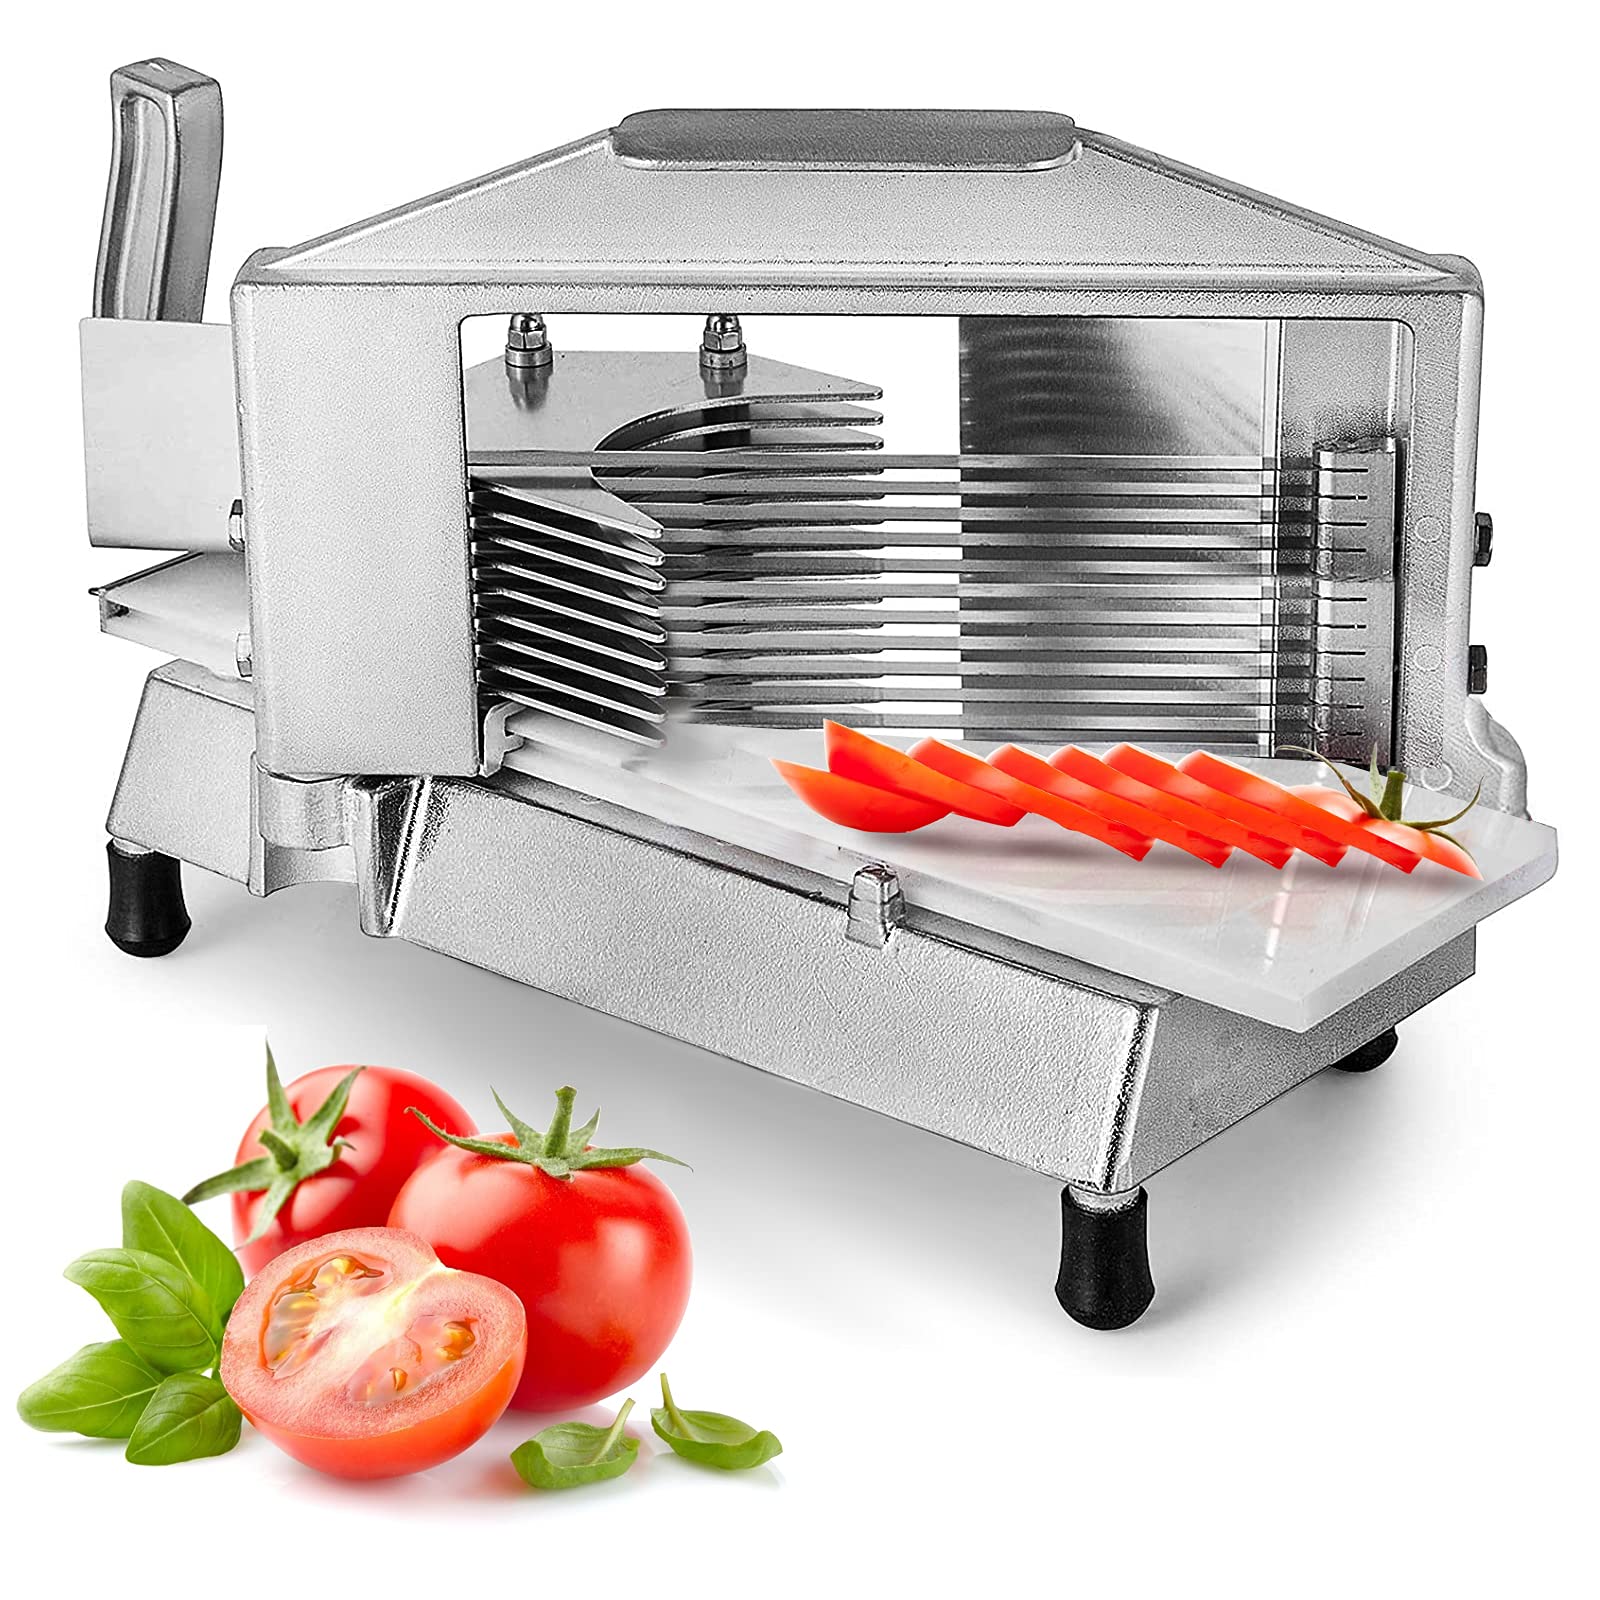 VEVOR Commercial Tomato Slicer, 3/16-Inch Tomato Cutter Vegetable Slicer, Manual Tomato Cutter with Built-in Cutting Board, Stainless Steel Blades for Restaurant or Home Use